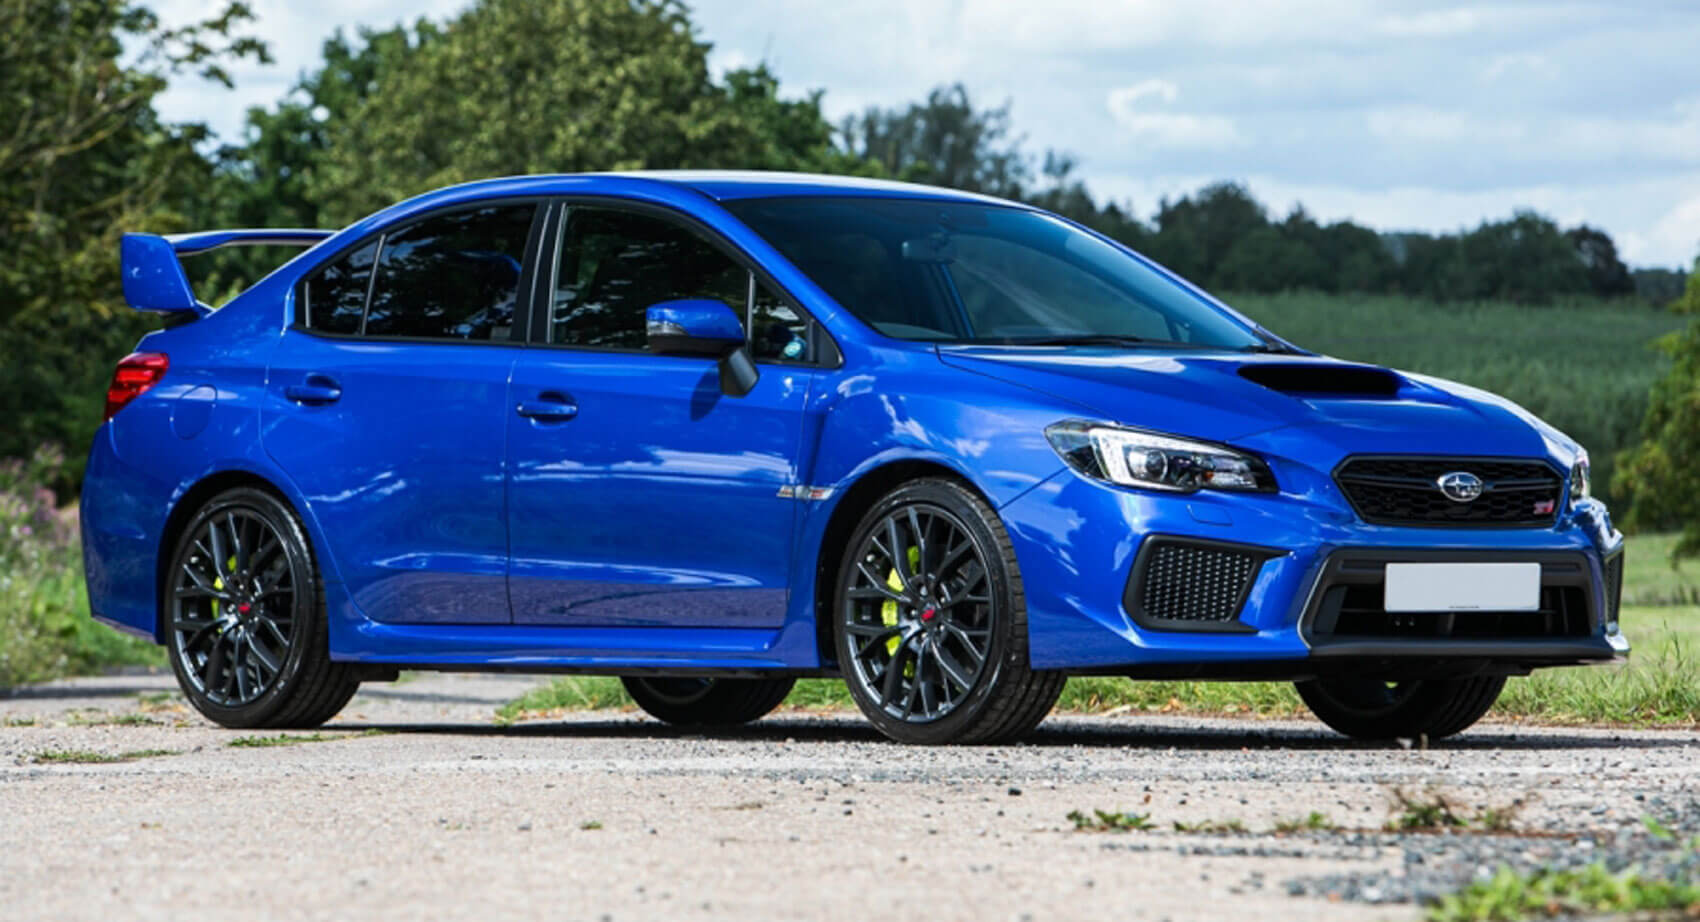 Make A Daily Driver Out Of This 2017 Subaru WRX